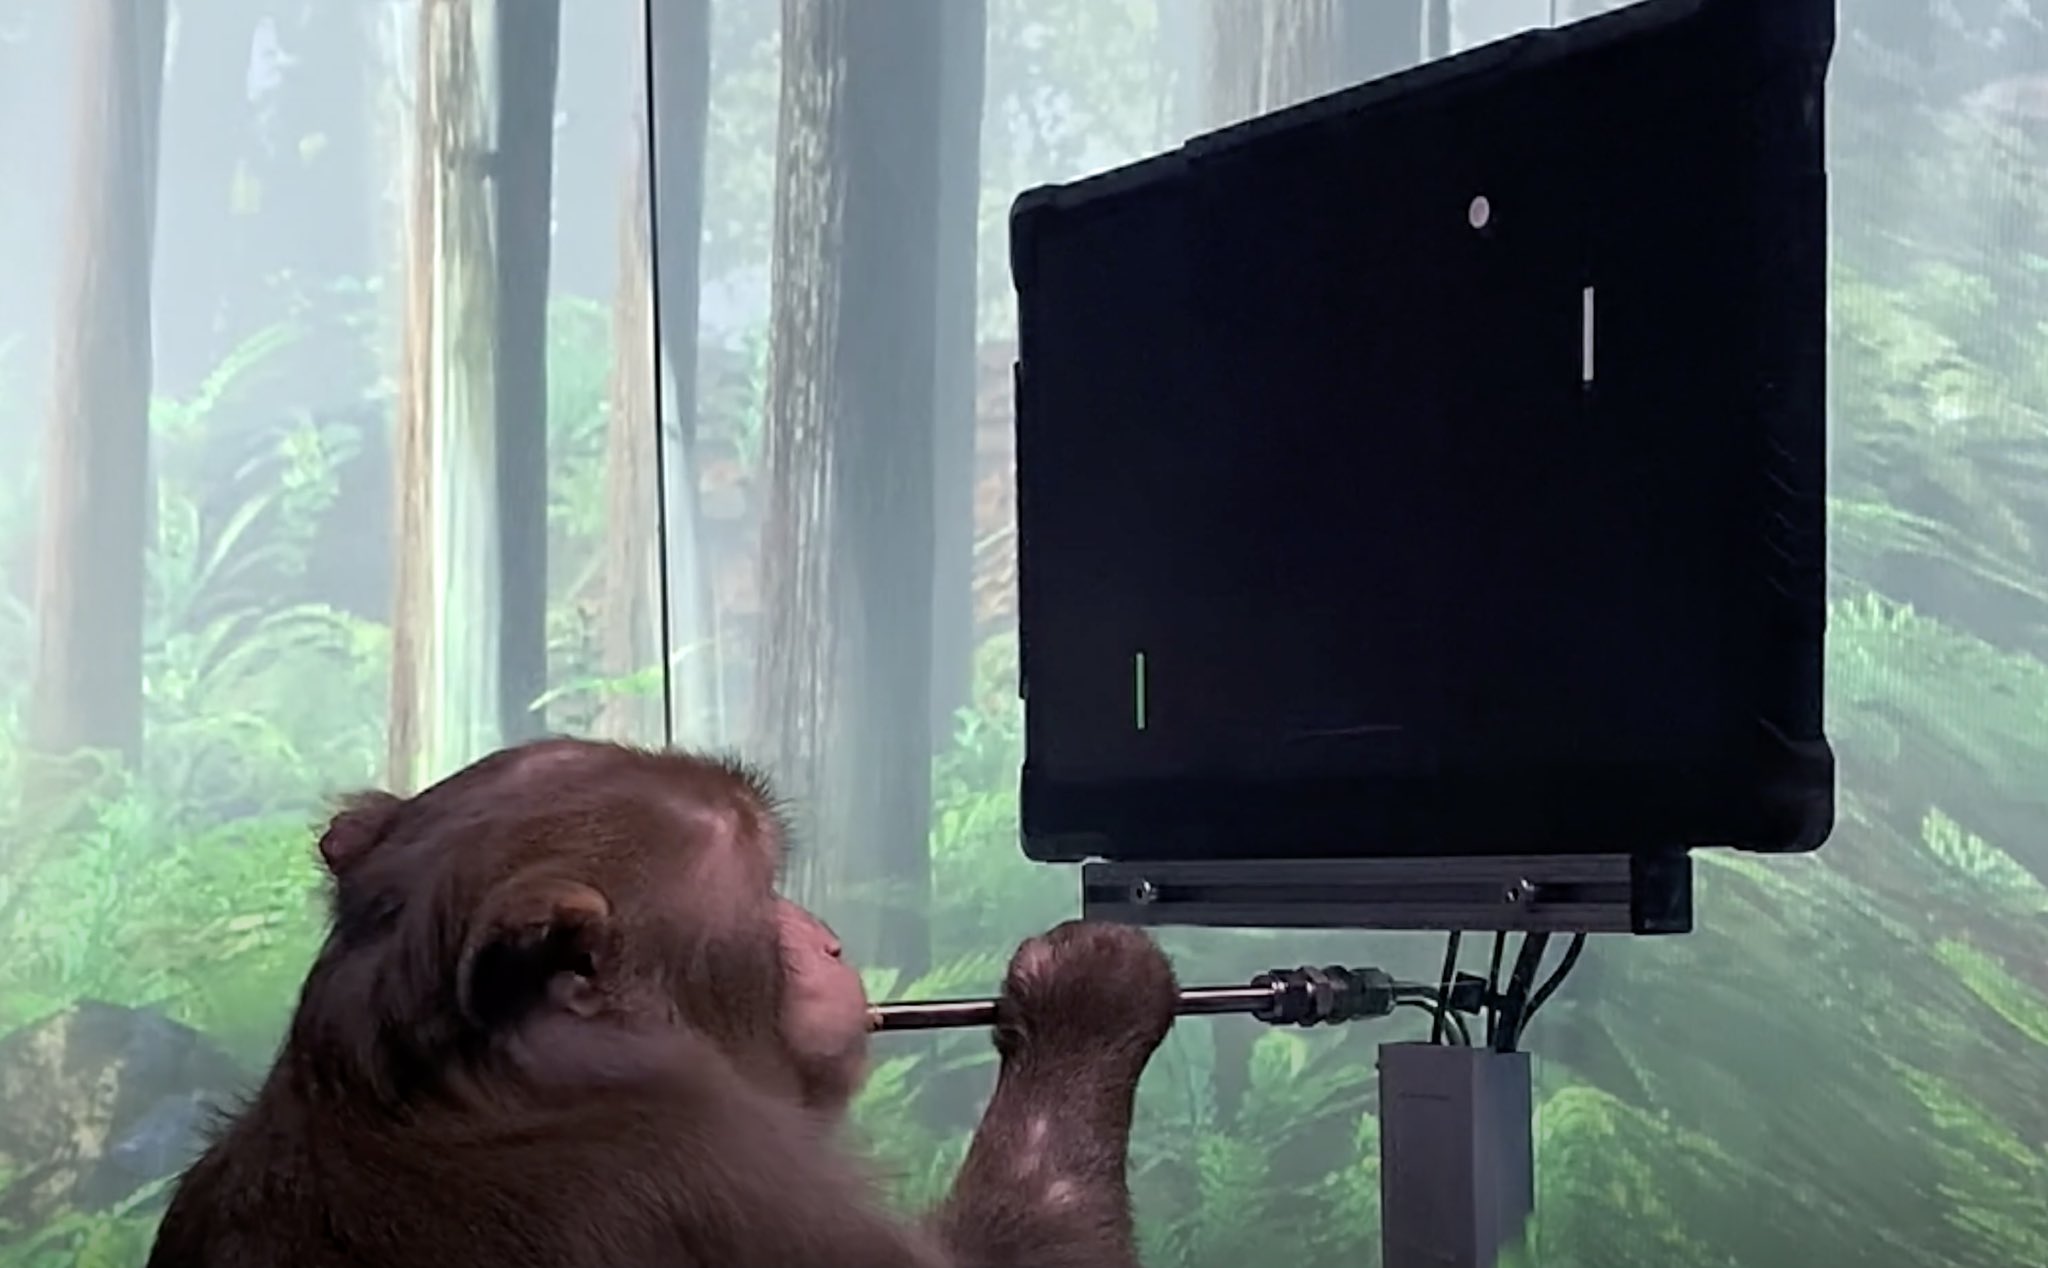 Watch: Elon Musk's Neuralink says this monkey is playing Pong with its psyche